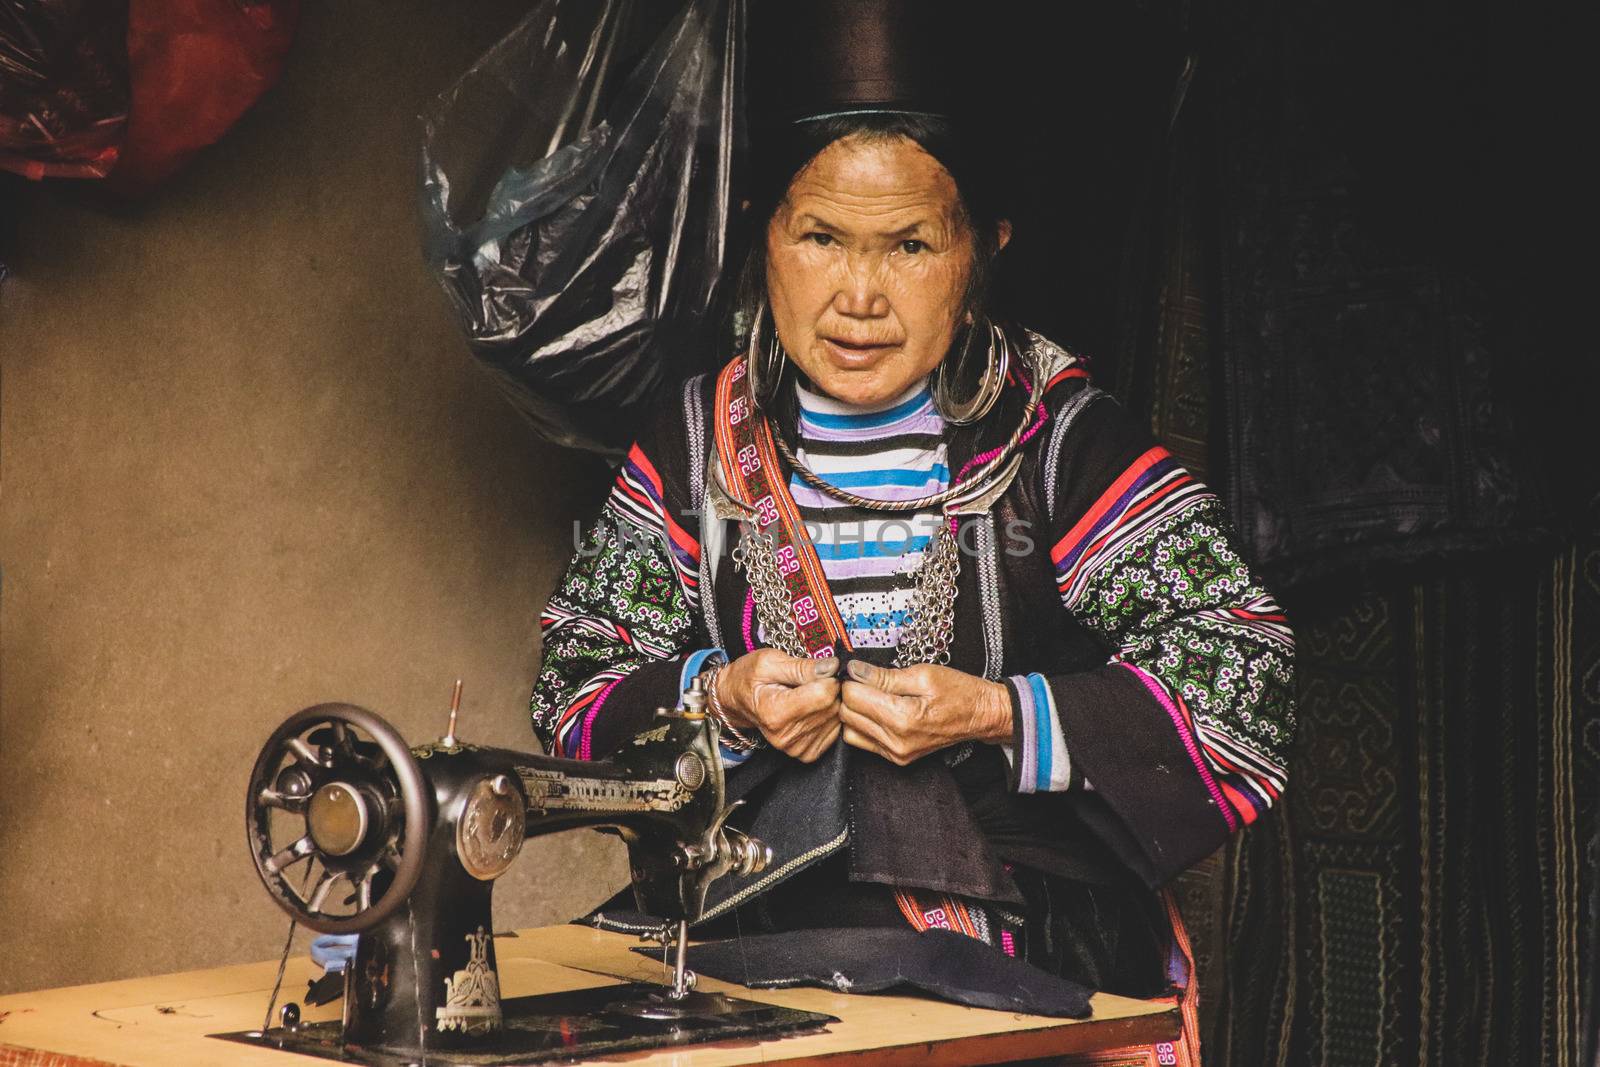 Editorial. Woman from the Black Hmong Tribe by Sonnet15